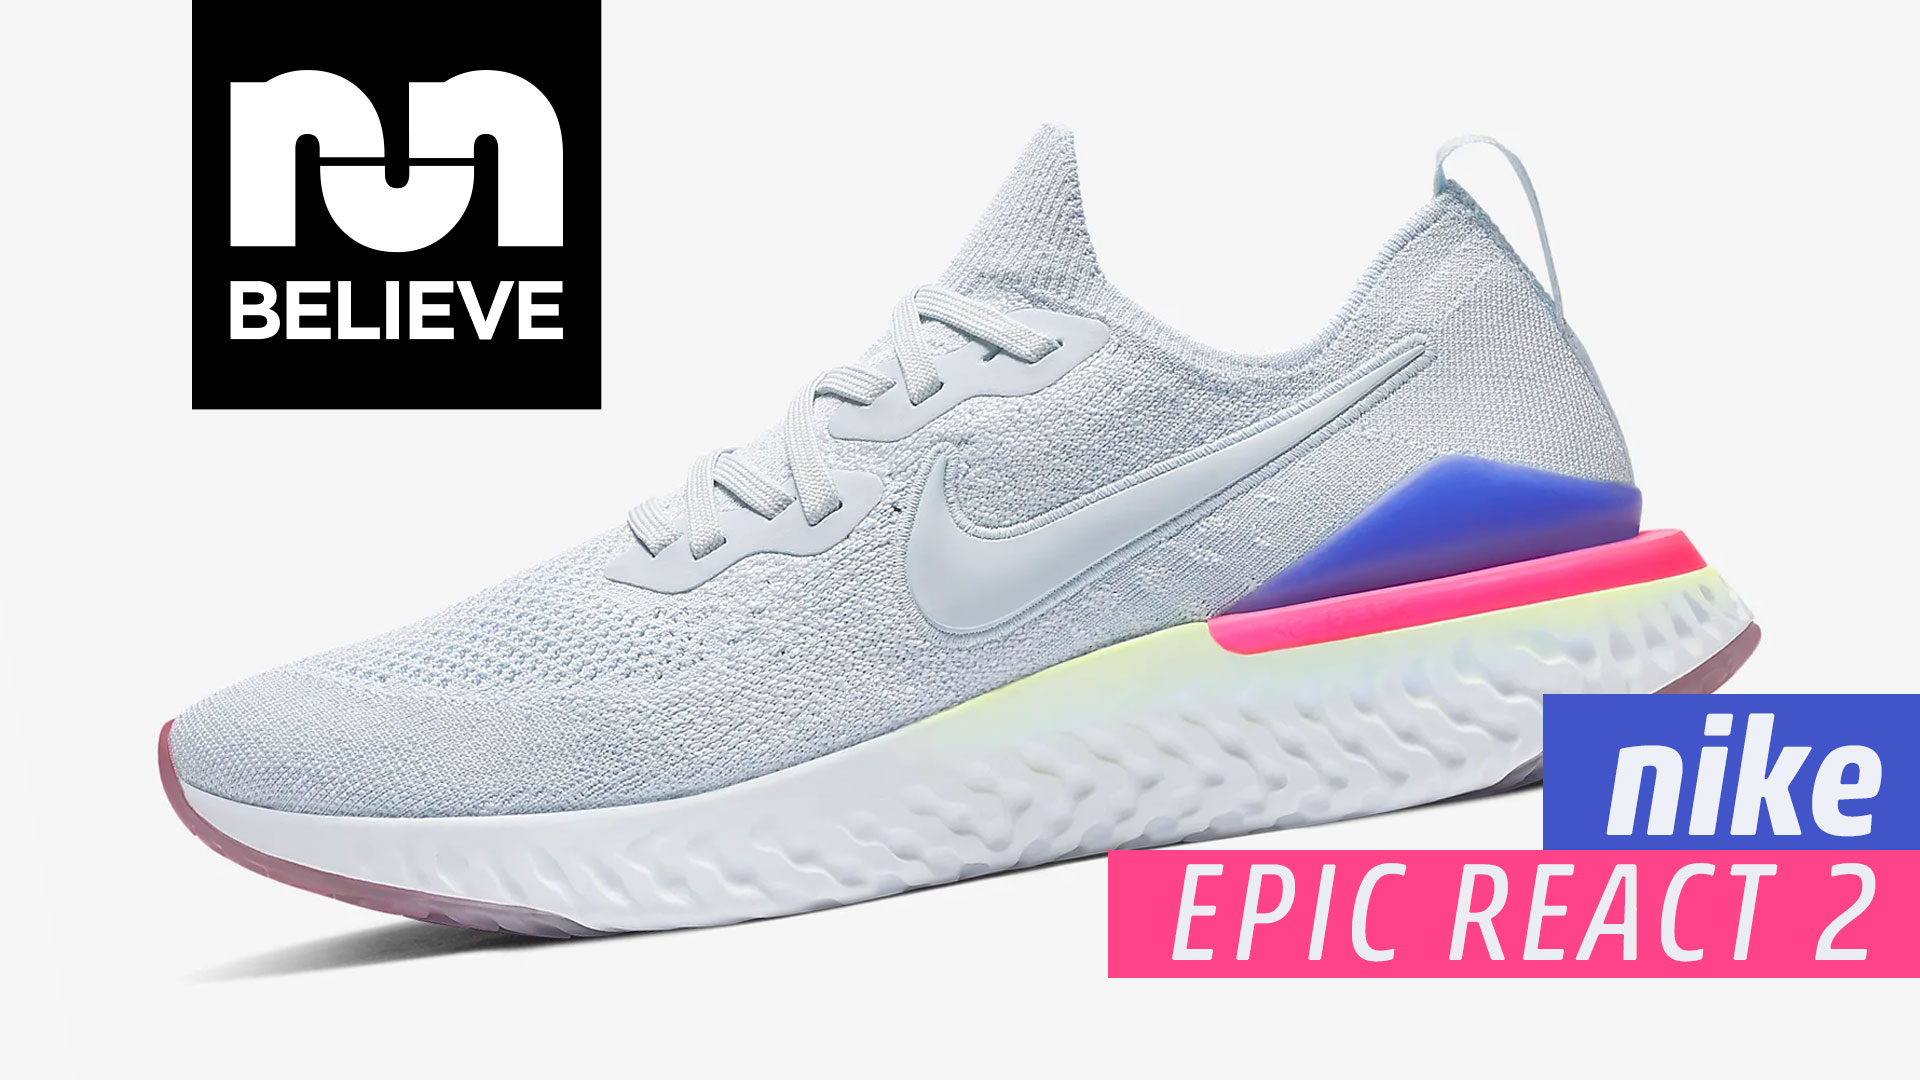 Nike Epic React 2 Video Performance Review - Believe in the Run